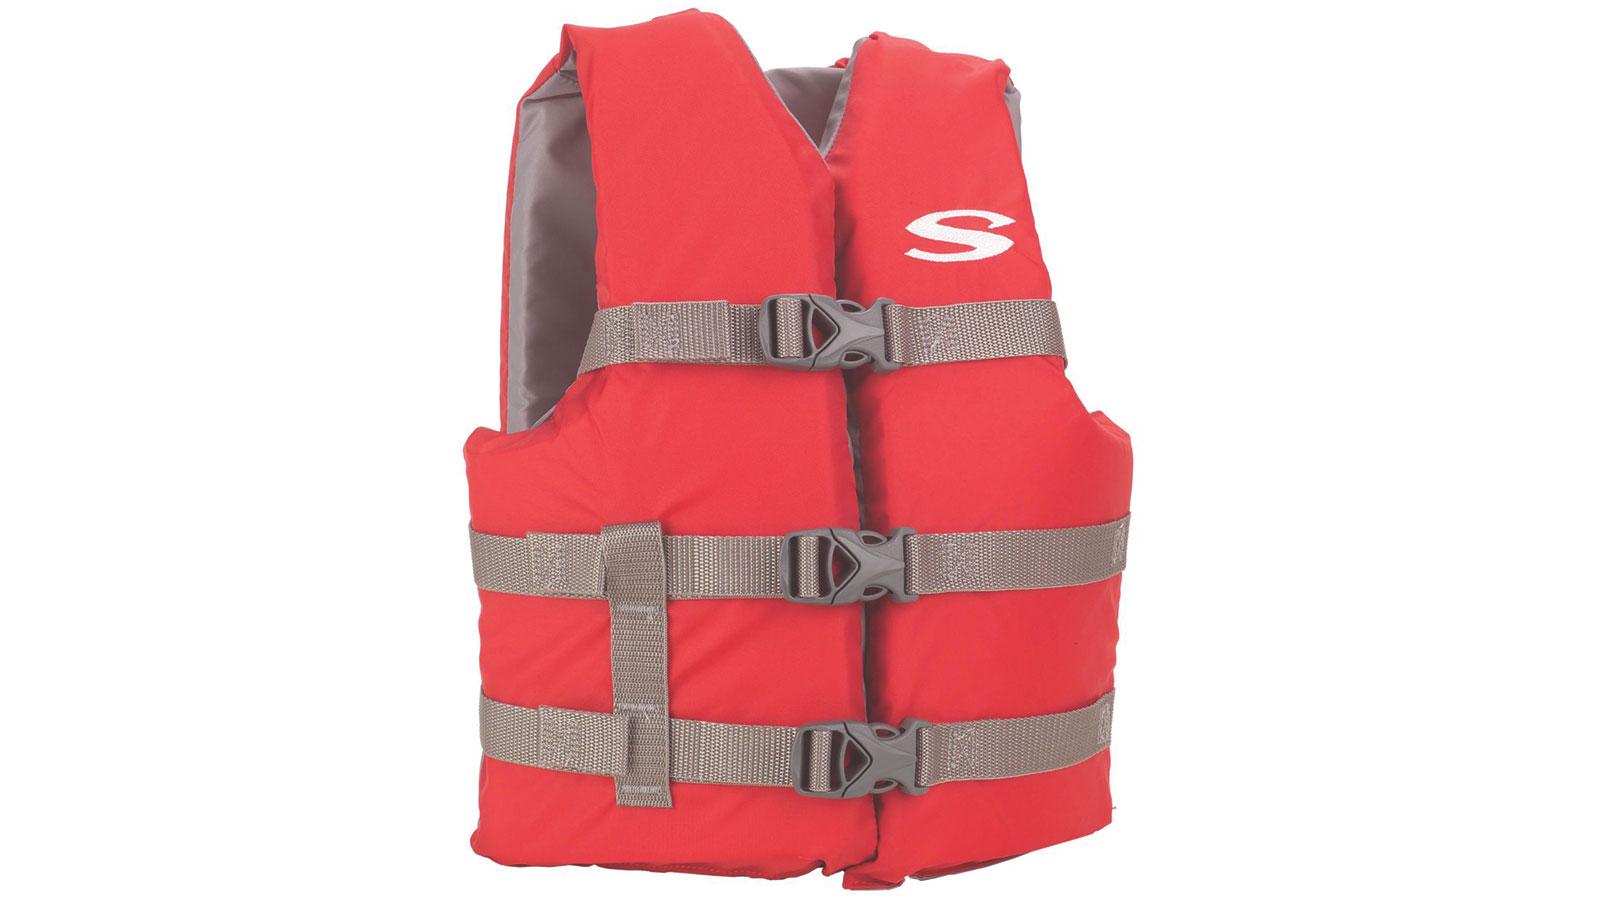 Stearns 3000004472 Youth Boating Vest 50-90Lb Red